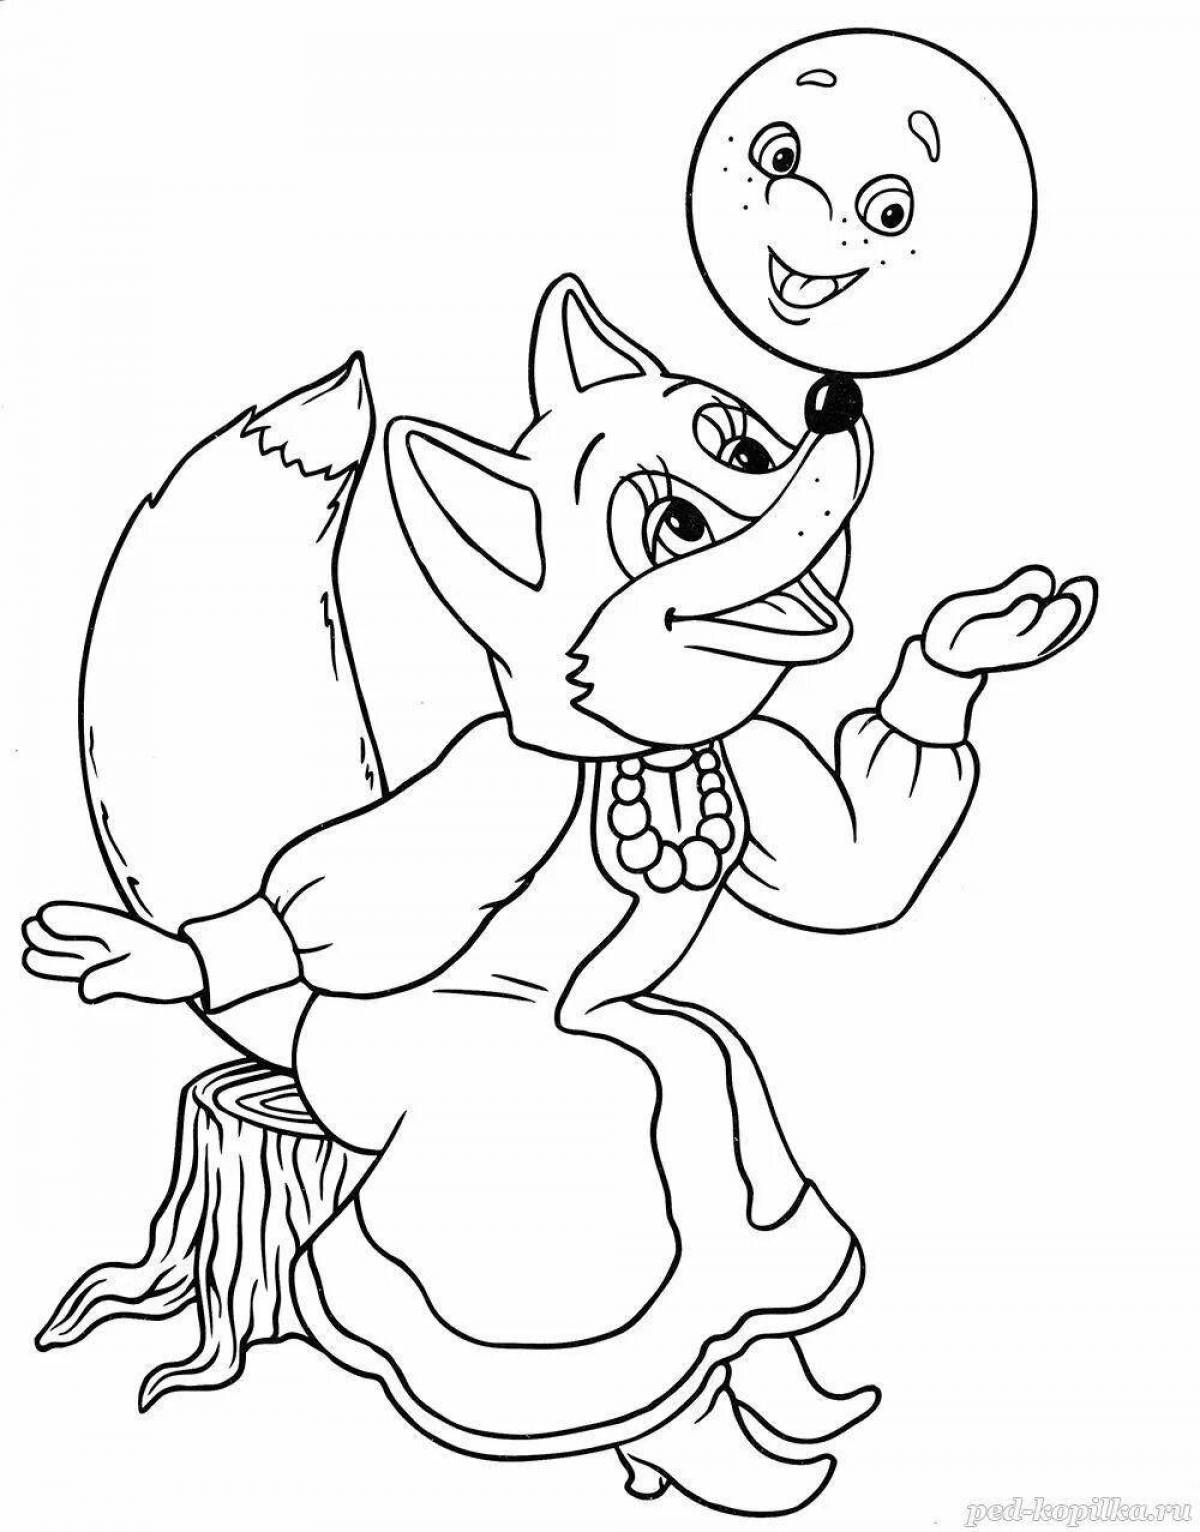 Coloring book funny kolobok for children 2-3 years old